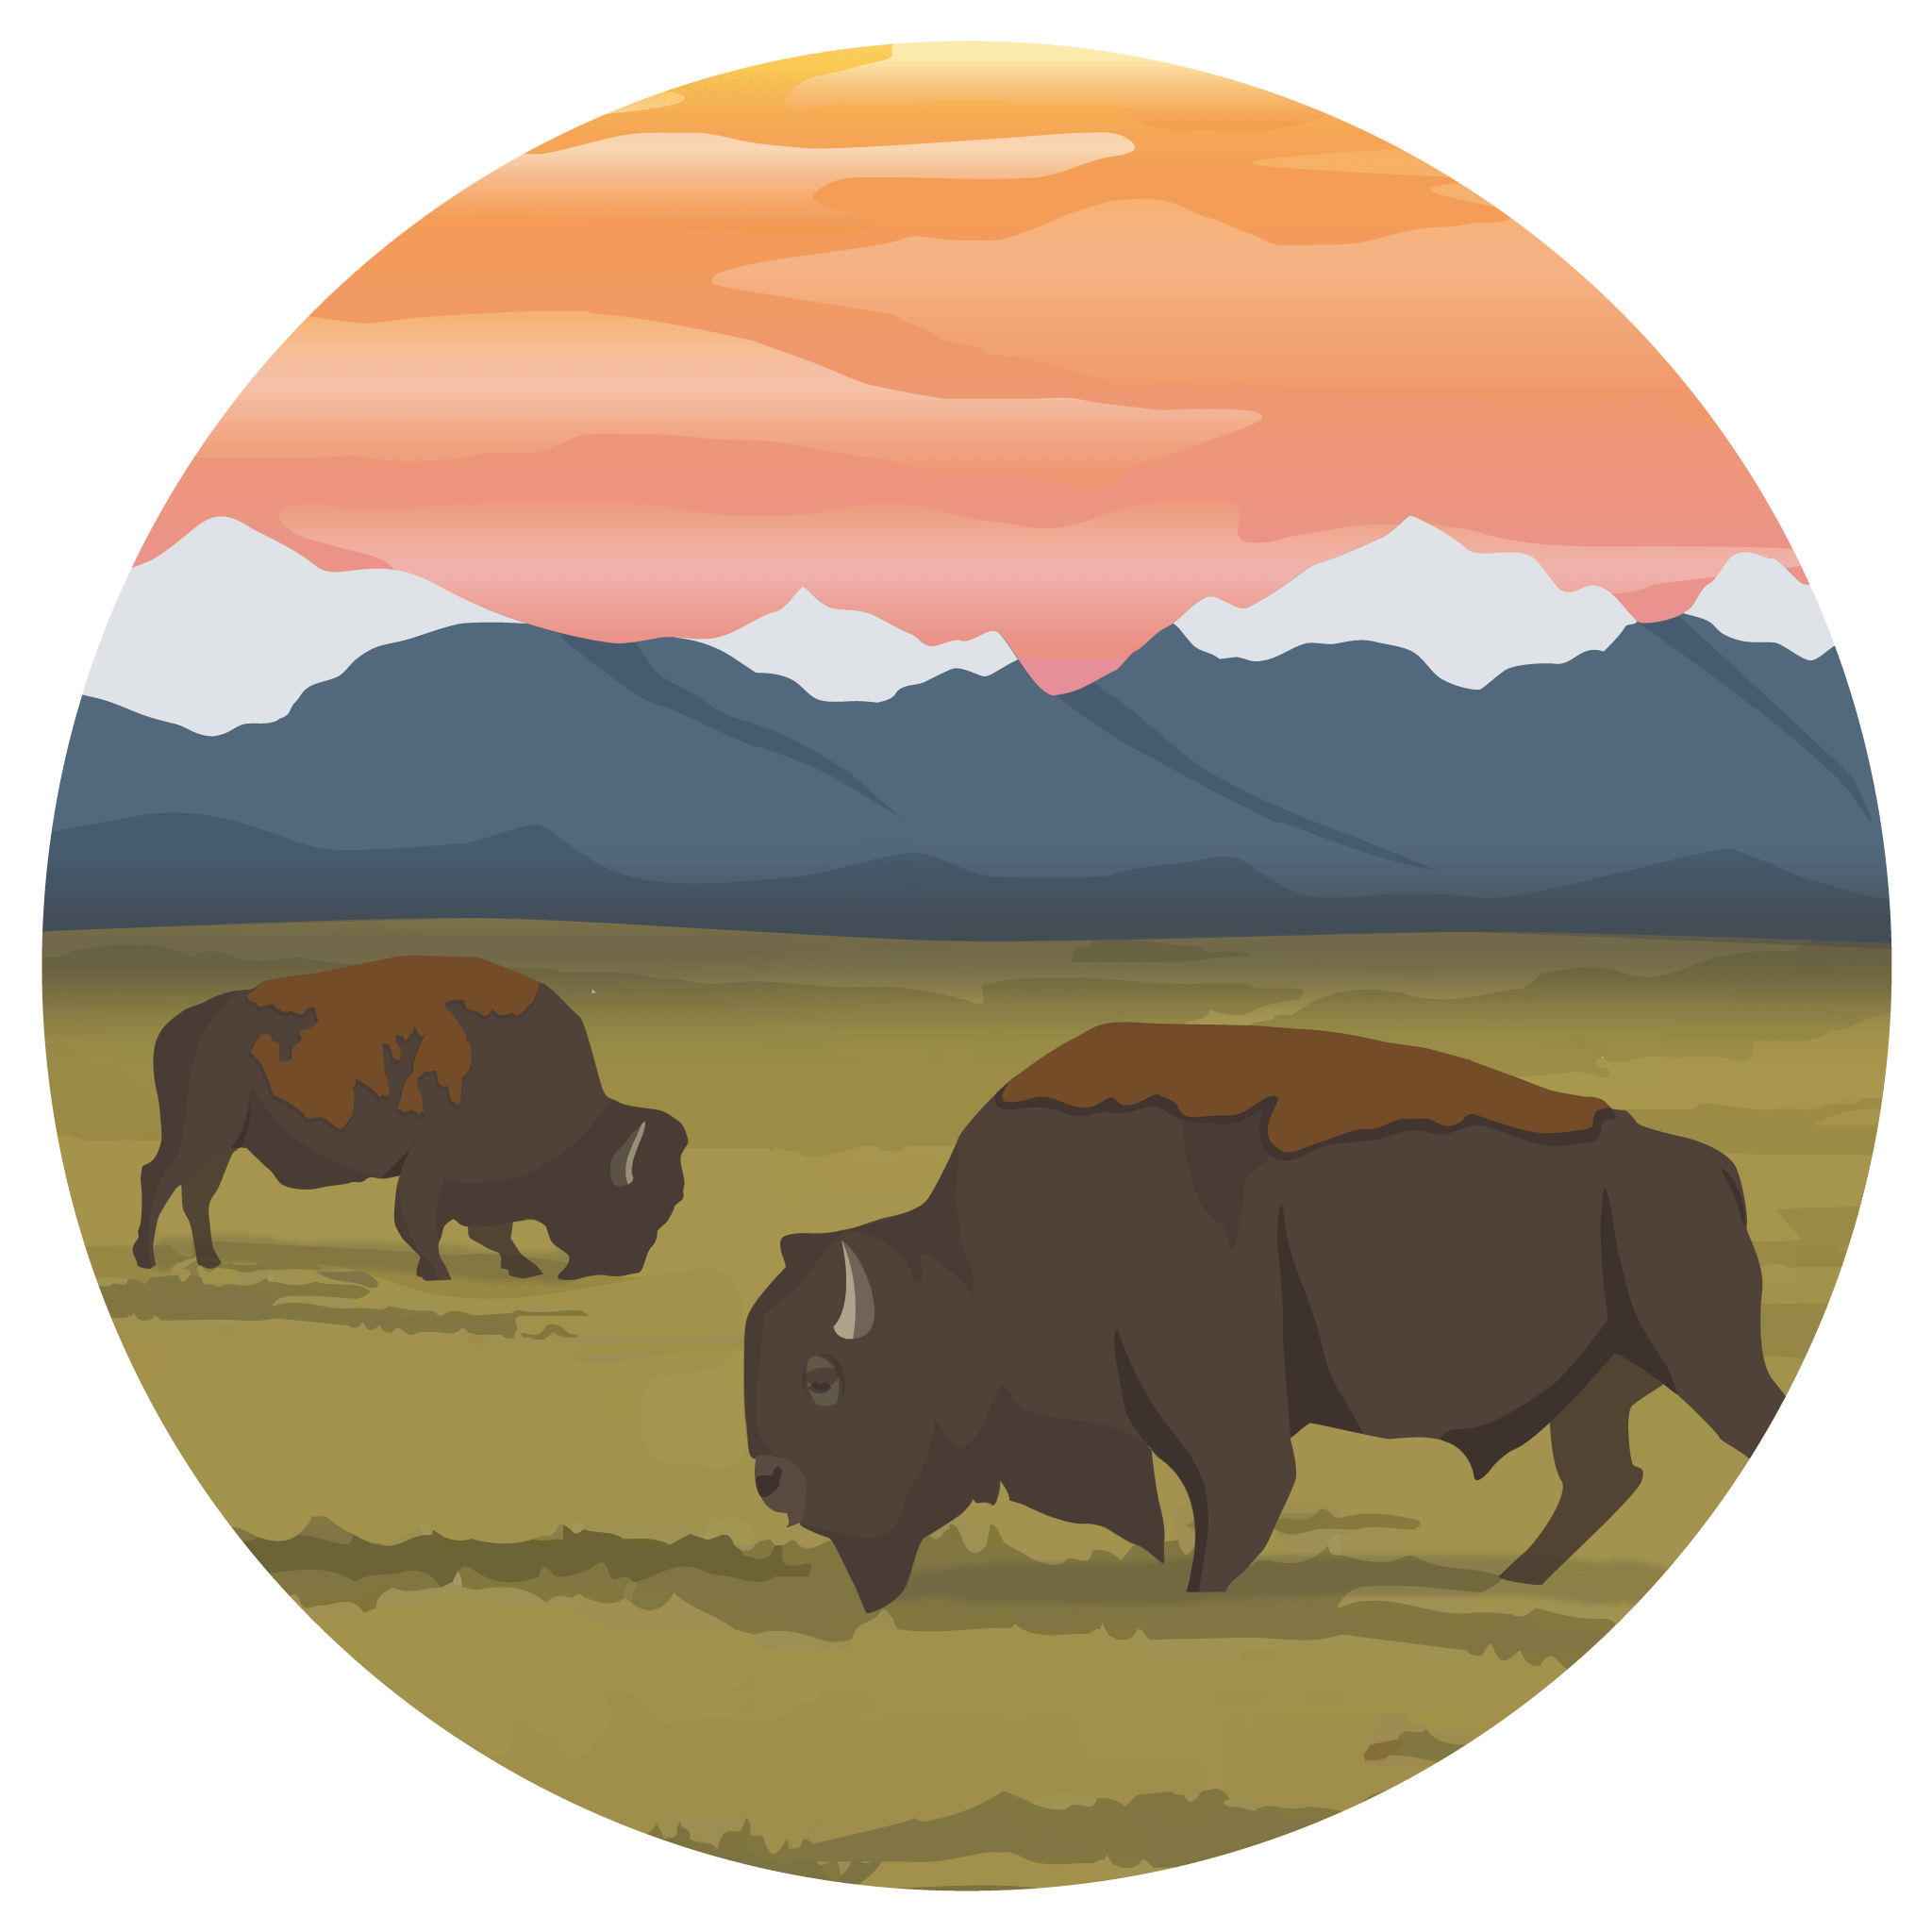 An illustration of buffalo in front of mountains